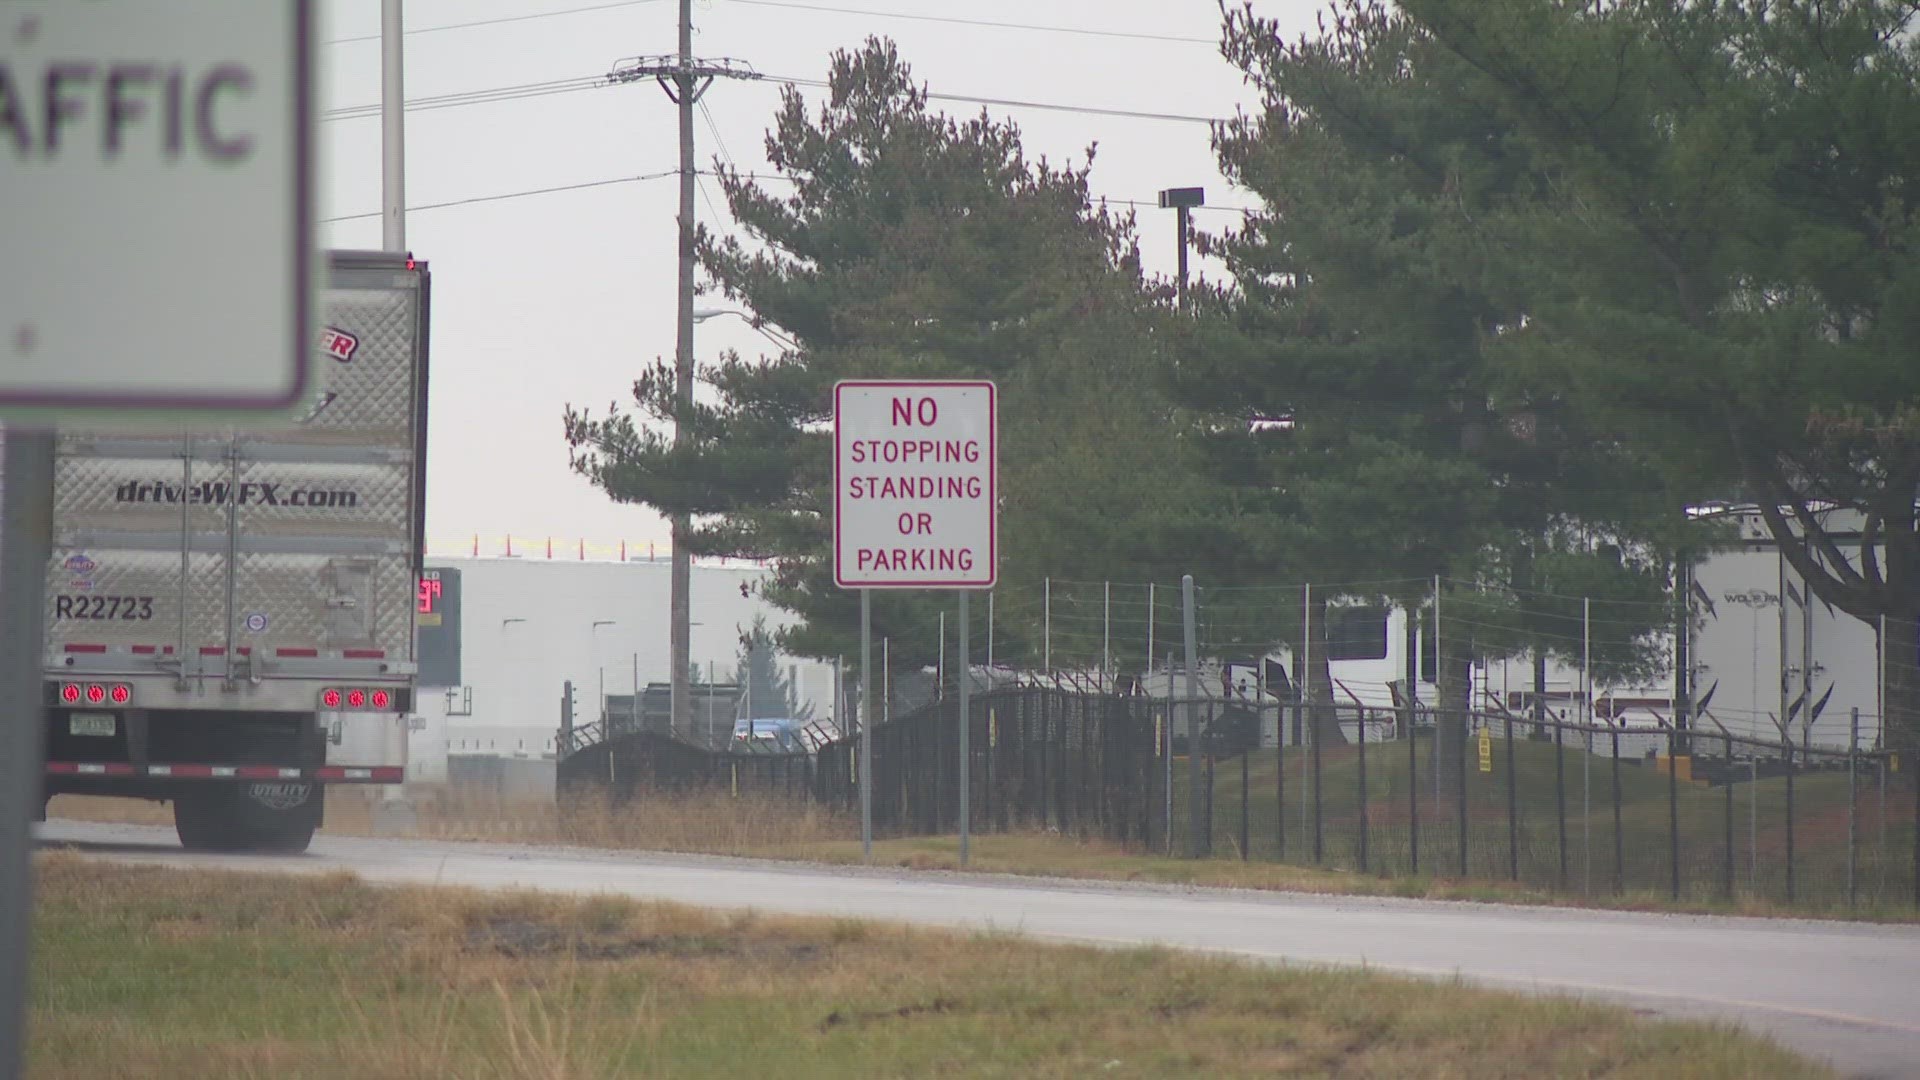 For the past two months near I-65, Greenwood police have had a nightly routine, knocking on truck cabs and warning semi drivers who are parked illegally to move.